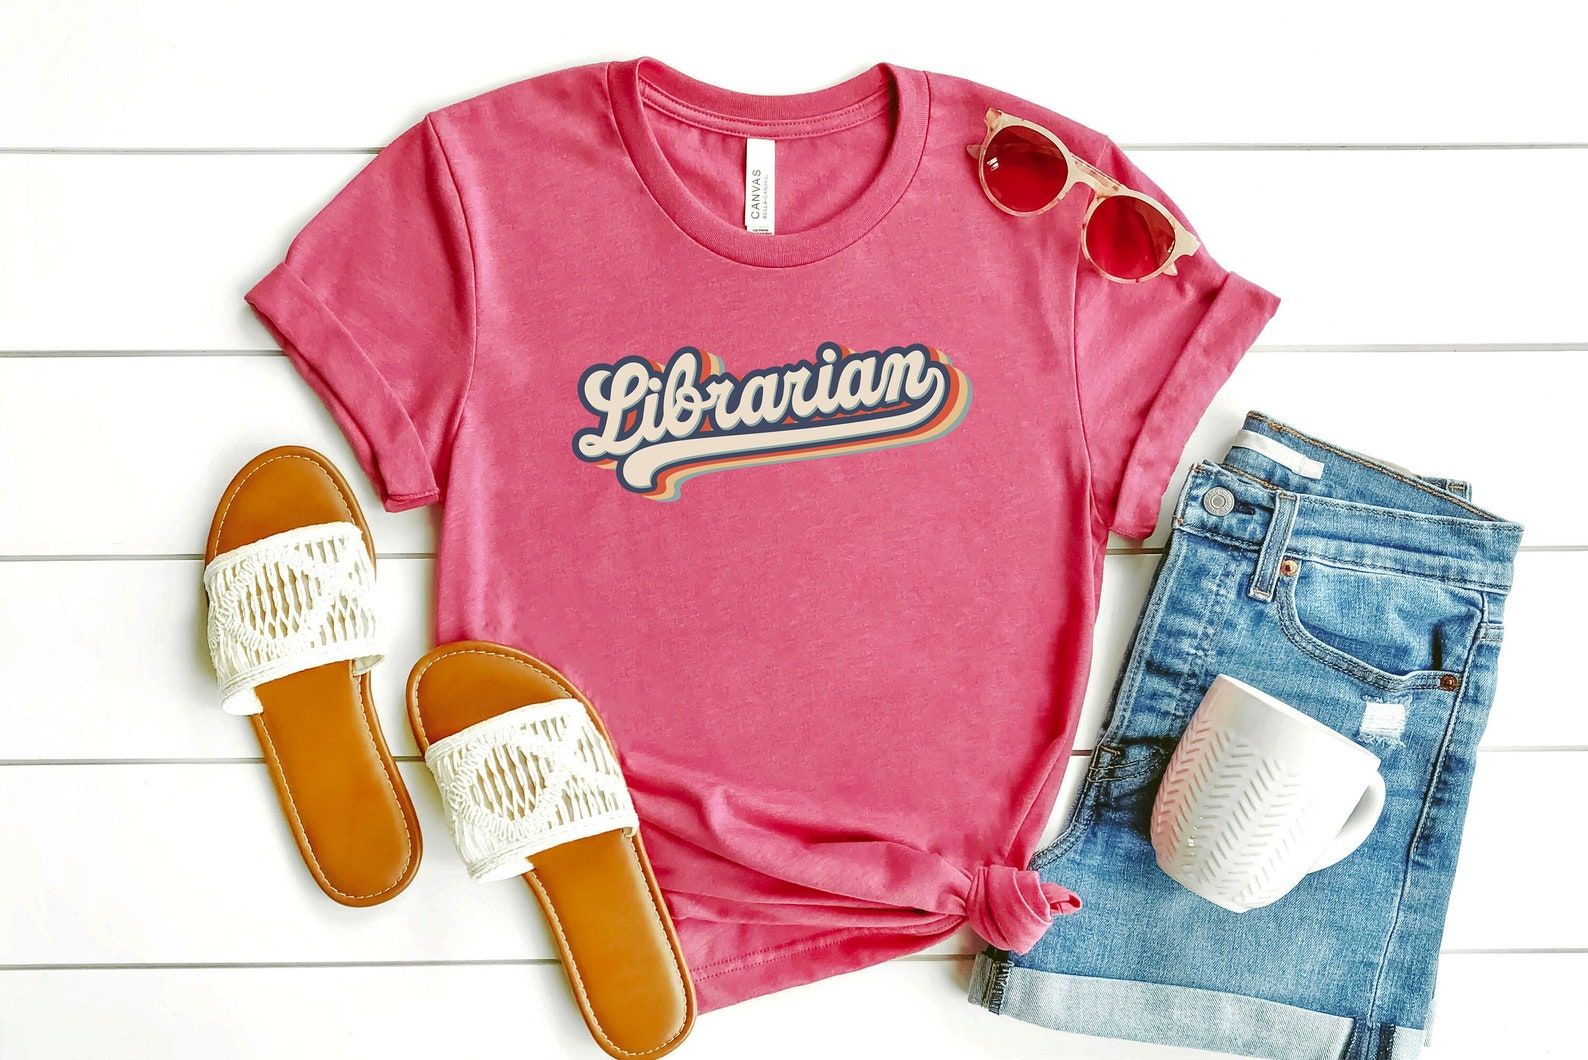 Image of a pink t-shirt reading "librarian" in colorful font. Beside the shirt are shorts, sandals, a coffee mug, and sunglasses. 